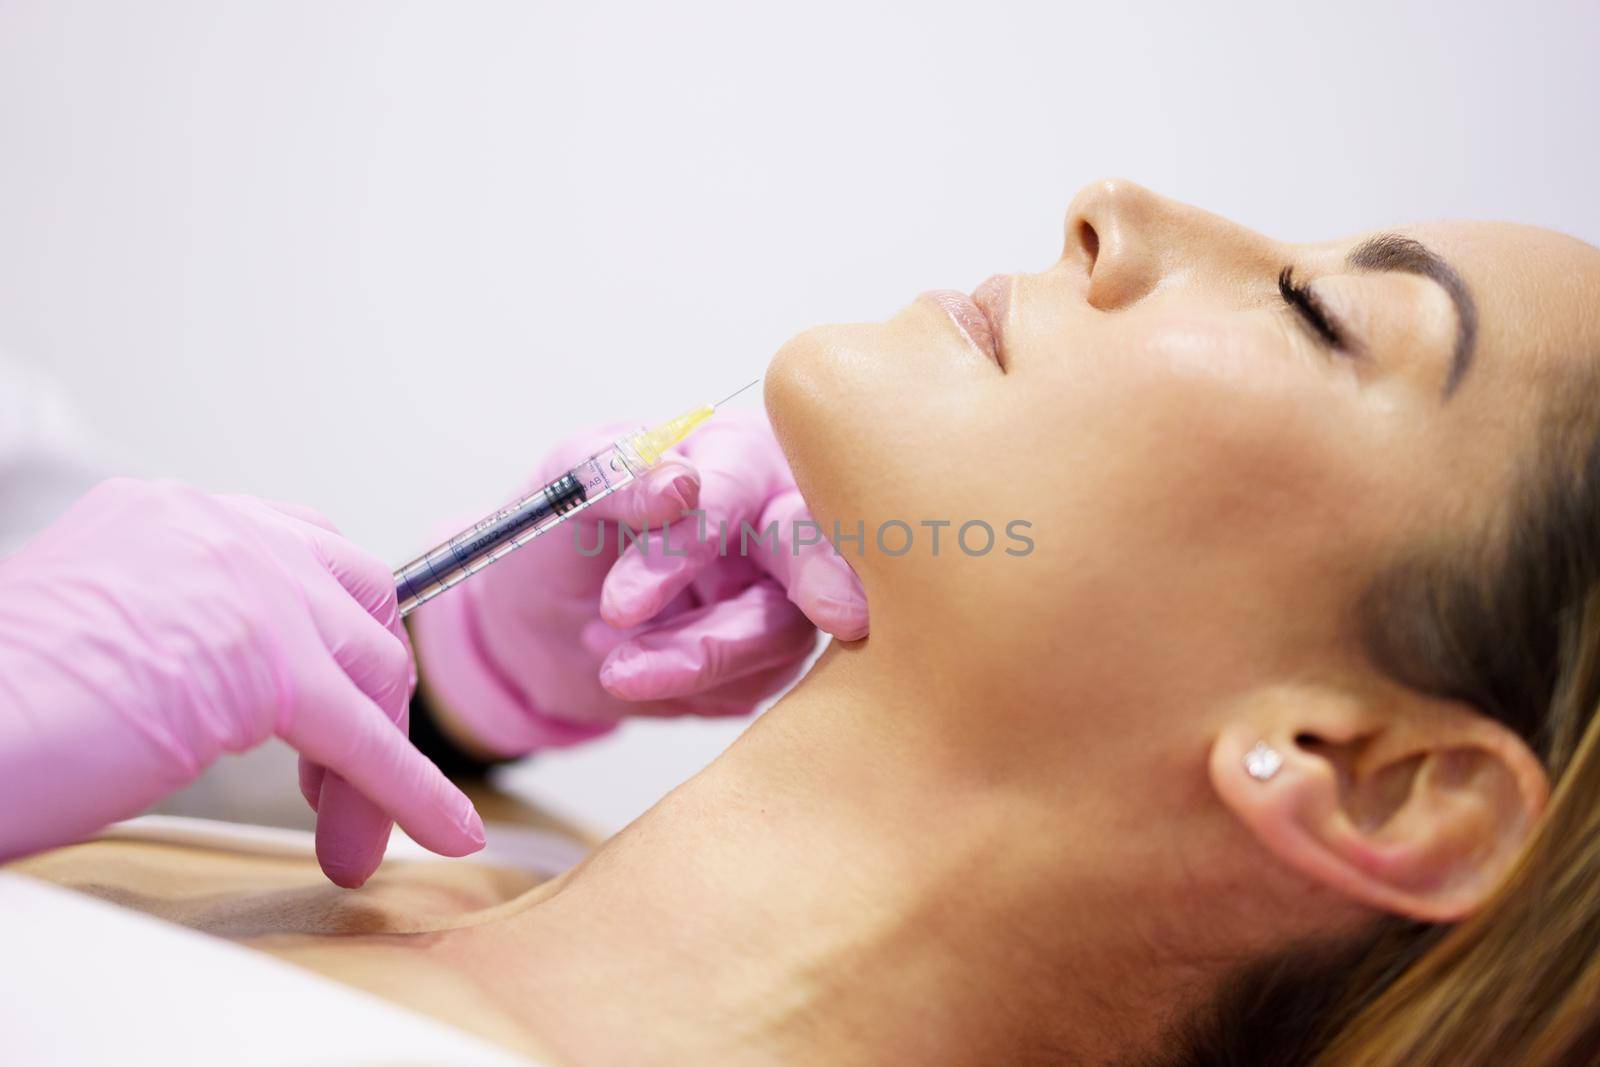 Doctor injecting hyaluronic acid into the chin of a middle-aged woman as a facial rejuvenation treatment.